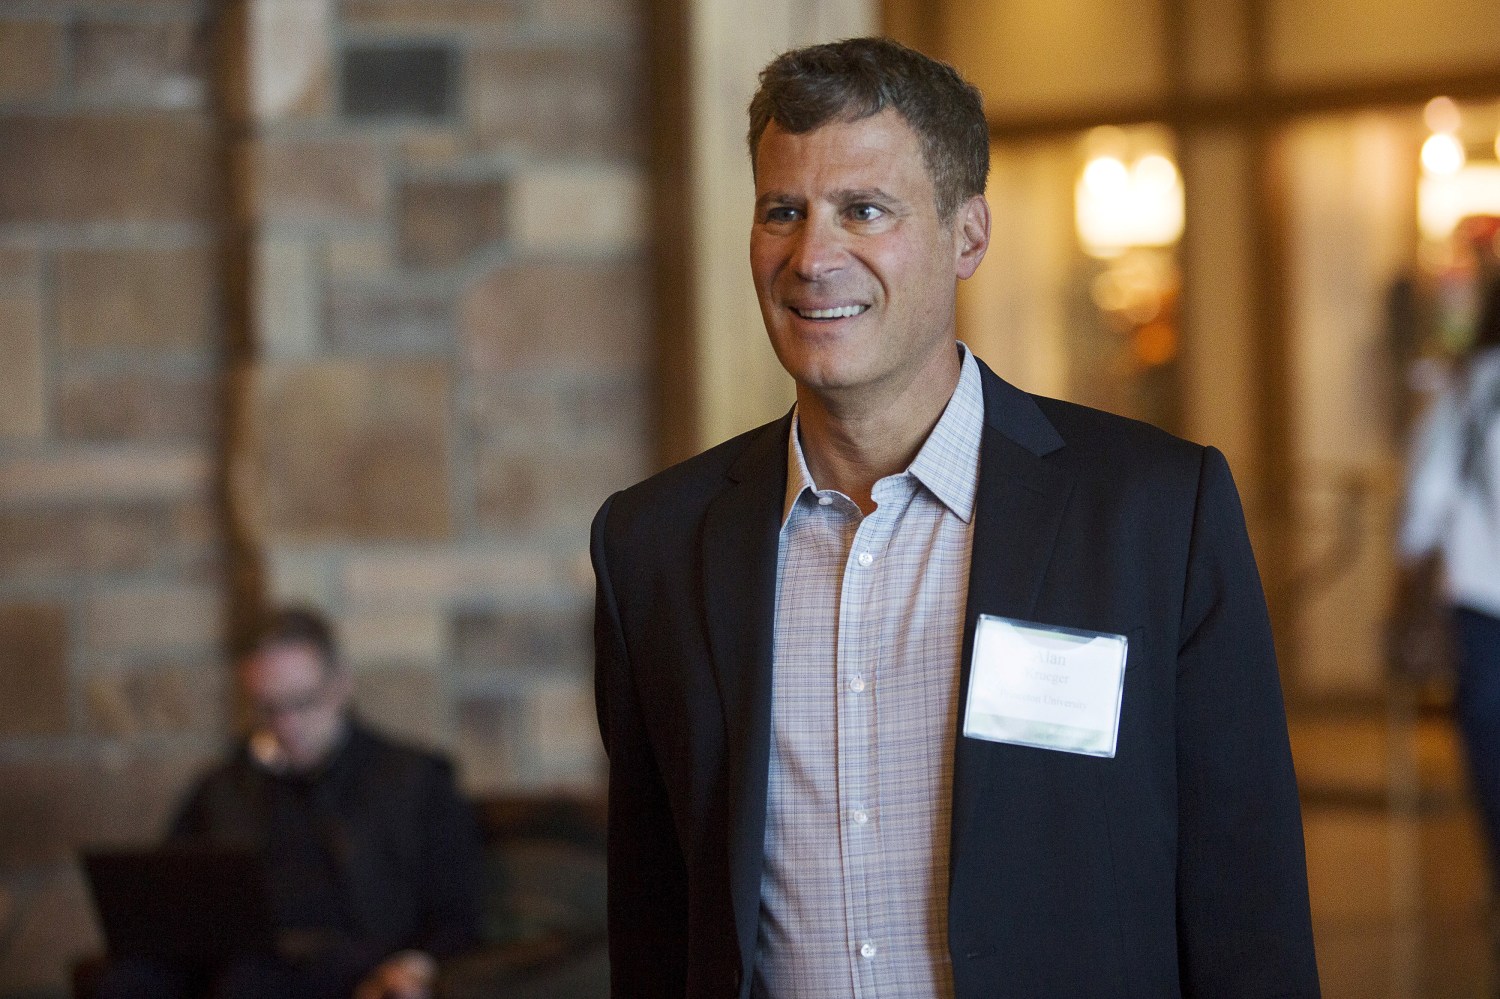 Princeton University Professor of Economics and Public Affairs Alan Krueger during the Federal Reserve Bank of Kansas City's annual Jackson Hole Economic Policy Symposium in Jackson Hole, Wyoming August 28, 2015. REUTERS/Jonathan Crosby - GF10000185435